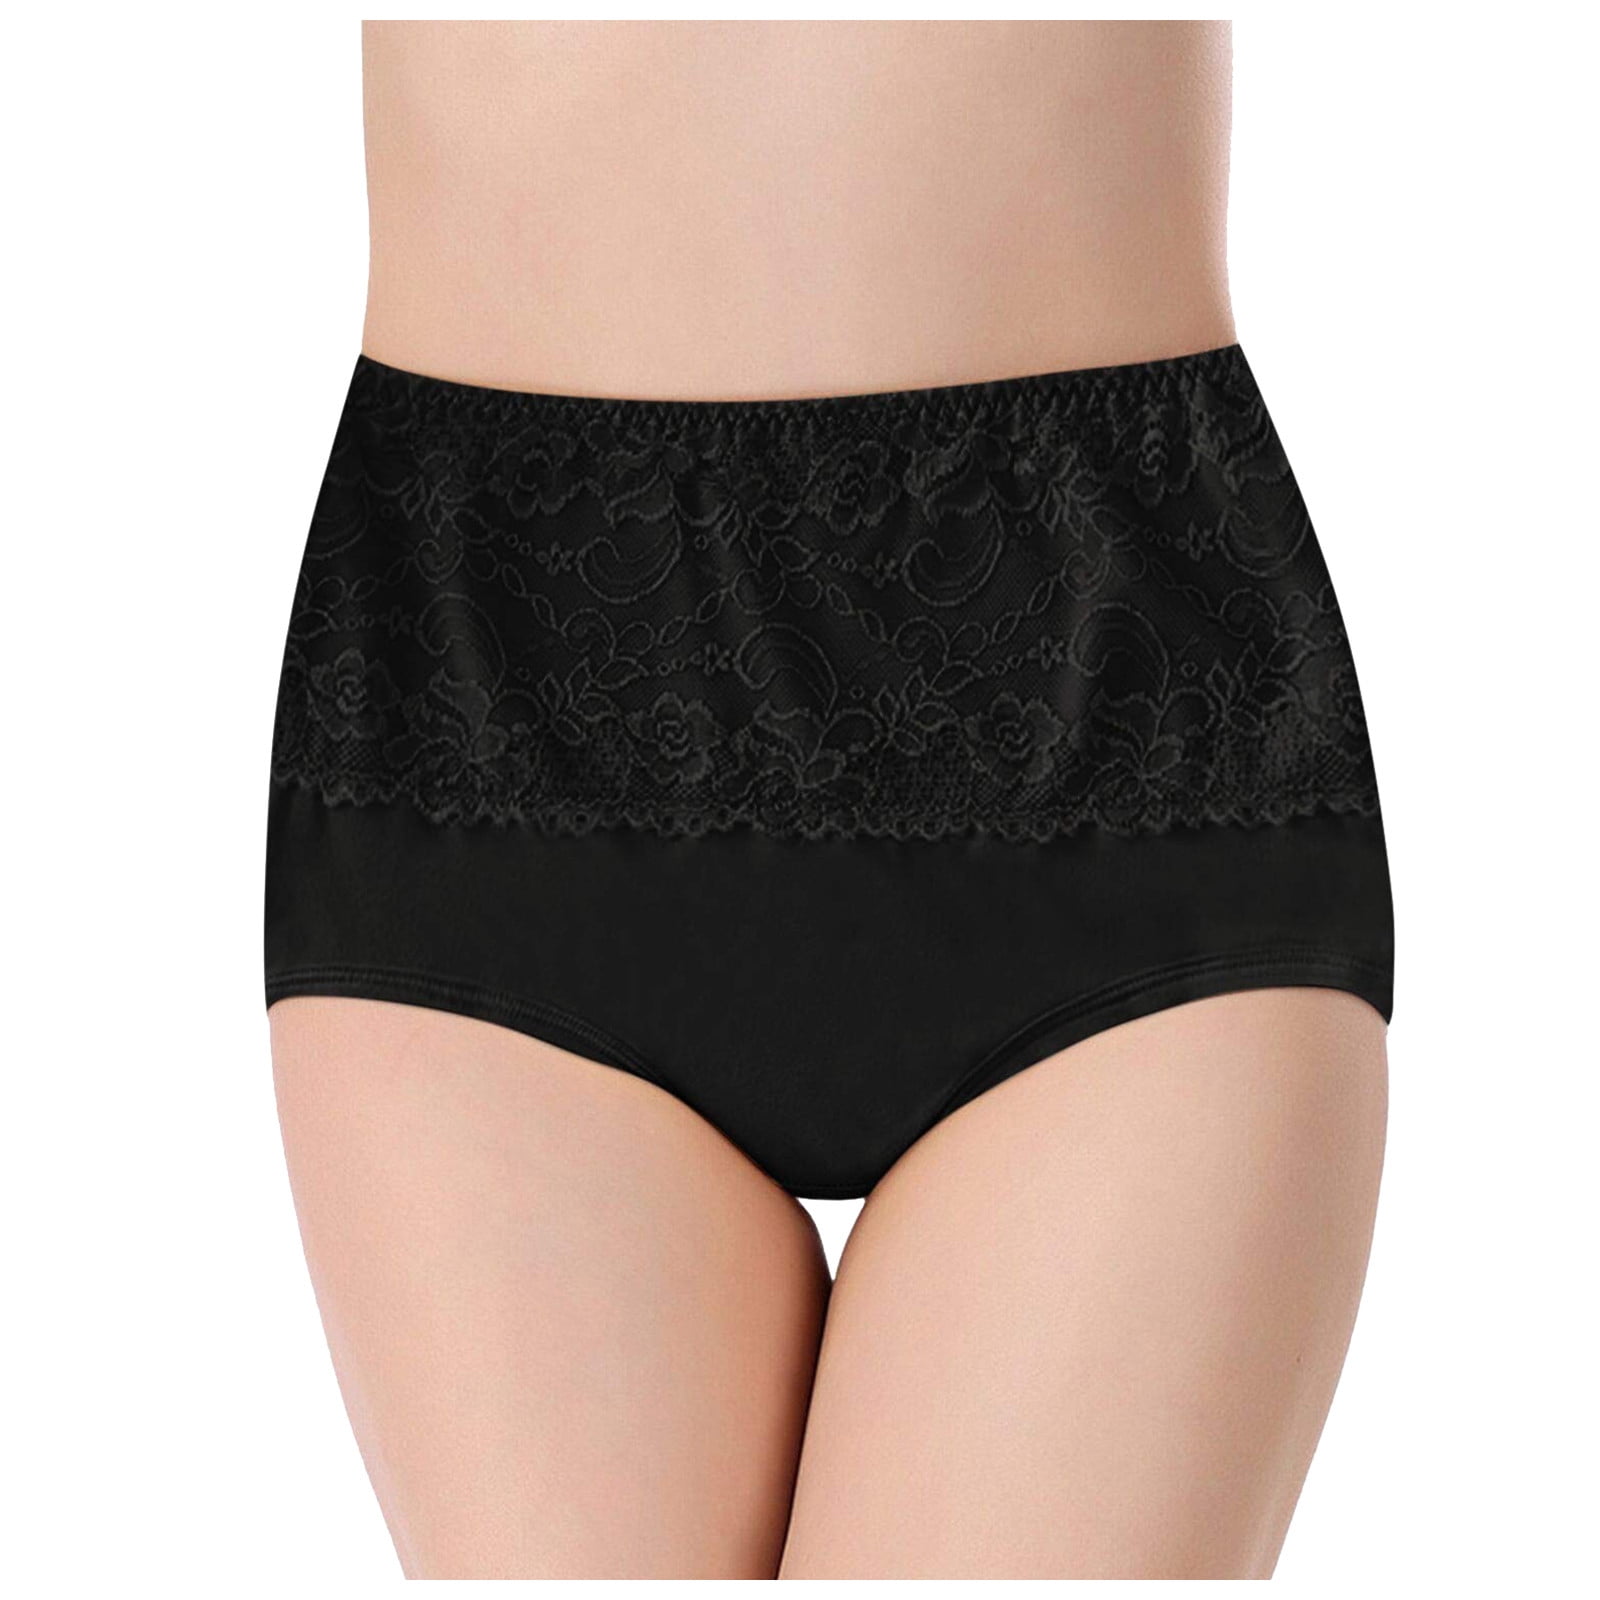 FUNCILAC Plus Size Lace Hipster Briefs Womens With Print Design And Cotton  Crotch For Women Mid Rise Lingerie In 2XL 4XL Sizes 5 Pack From Bai01,  $11.53